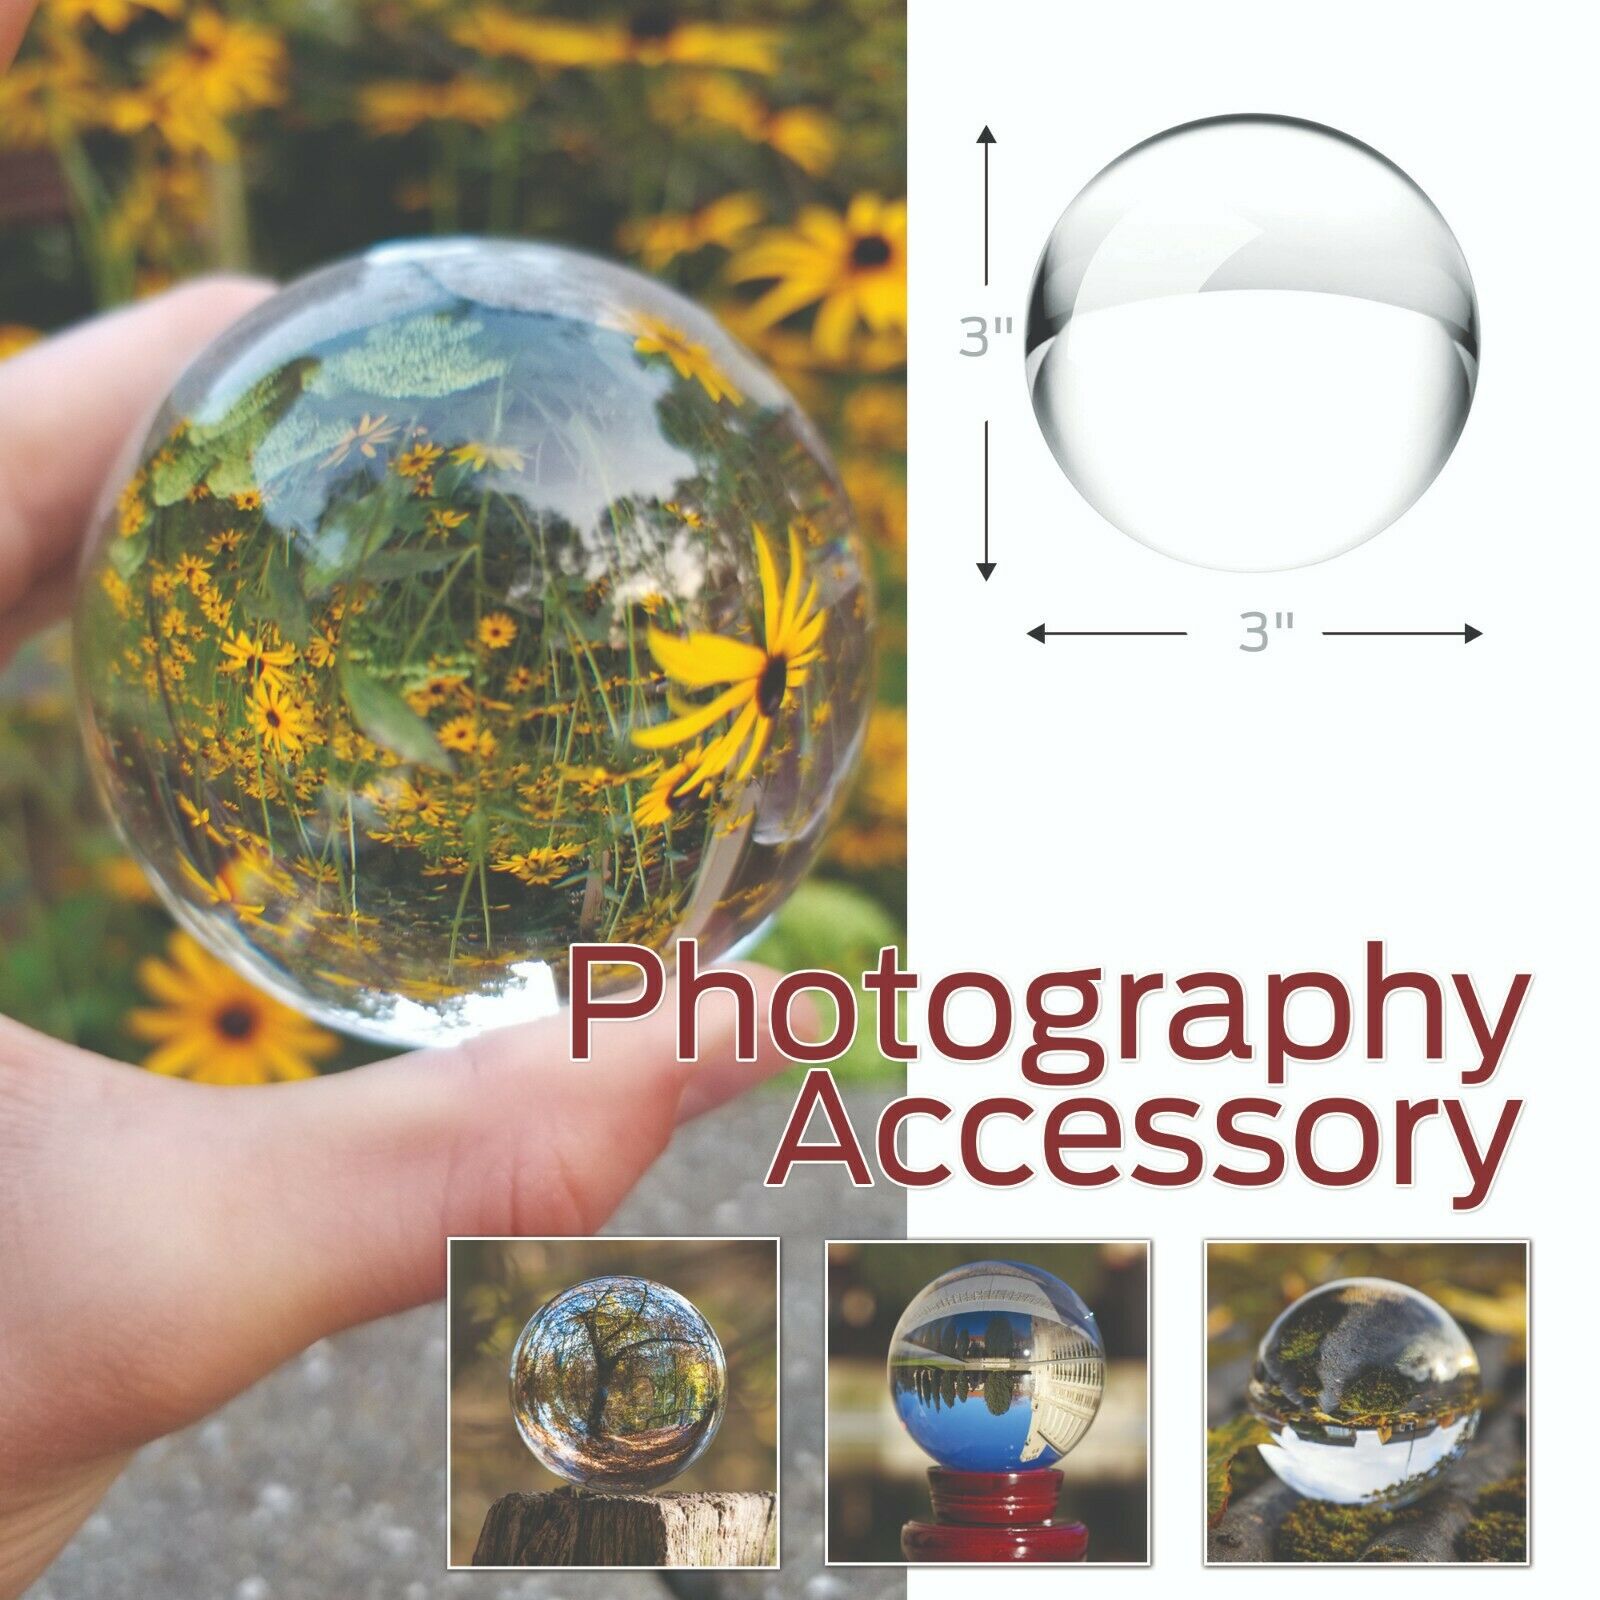 50 Crystal Ball Sphere For Photography With Microfiber Cleaning Cloth